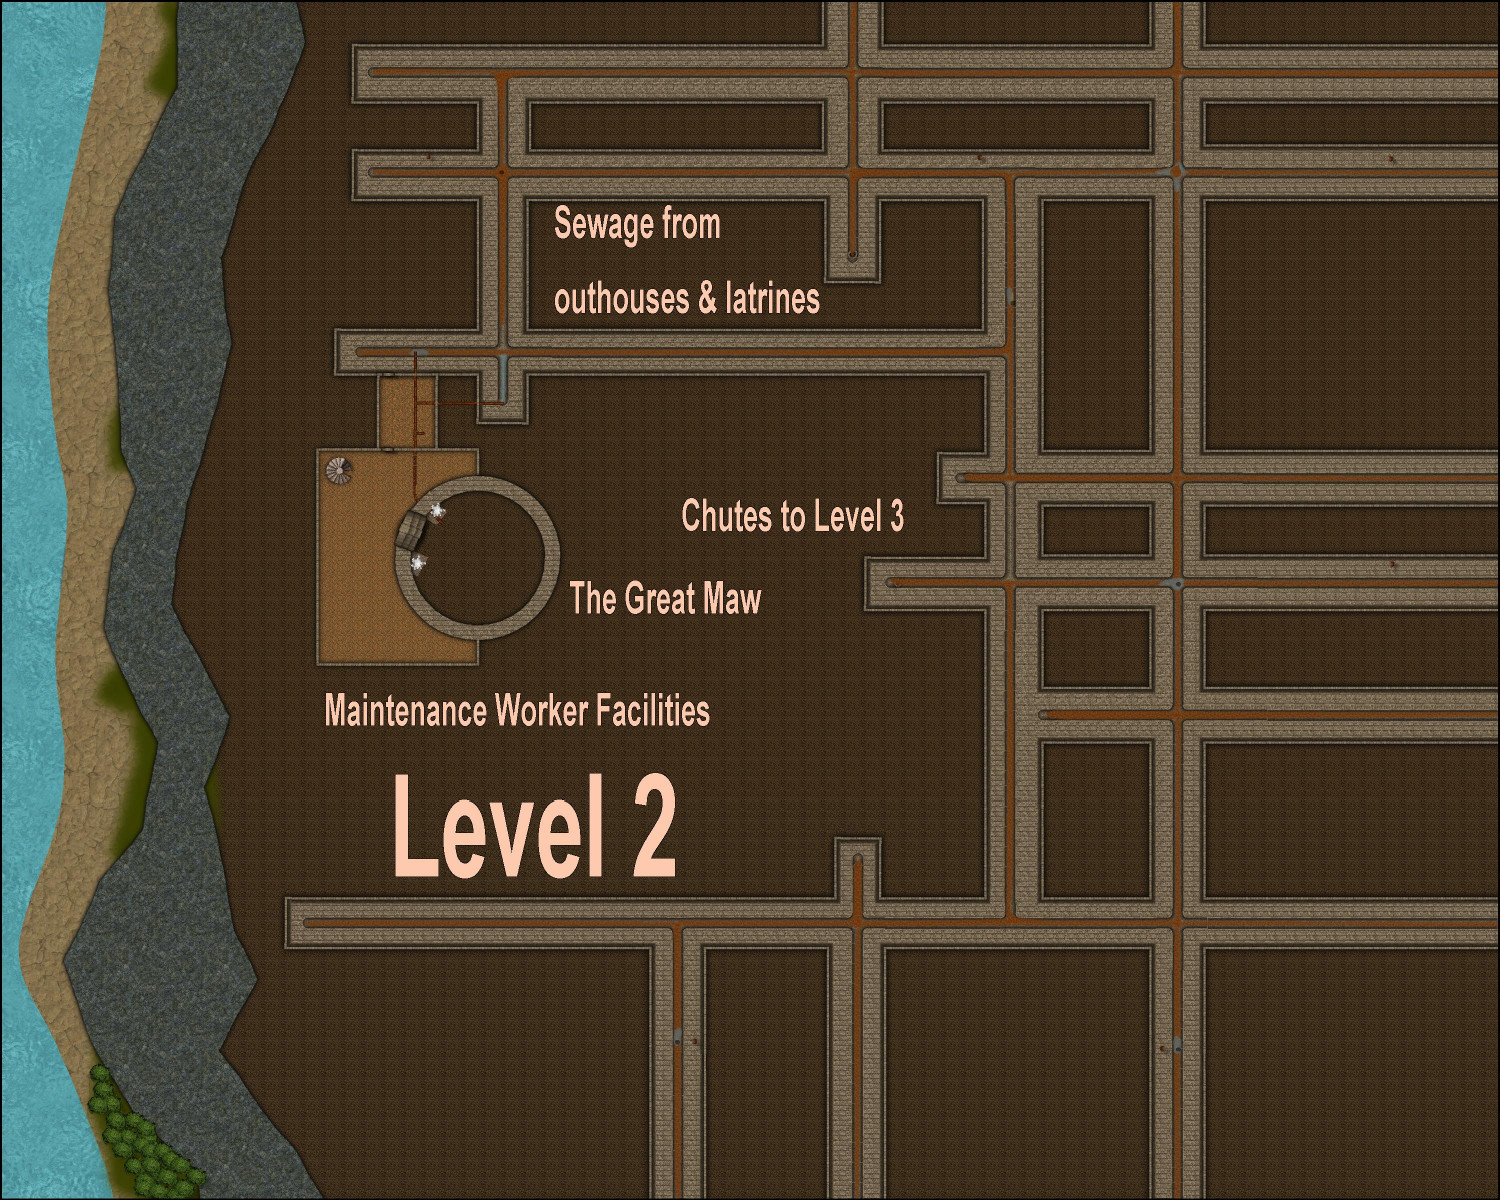 Town Sewer System - Level 2 -  labeled.JPG